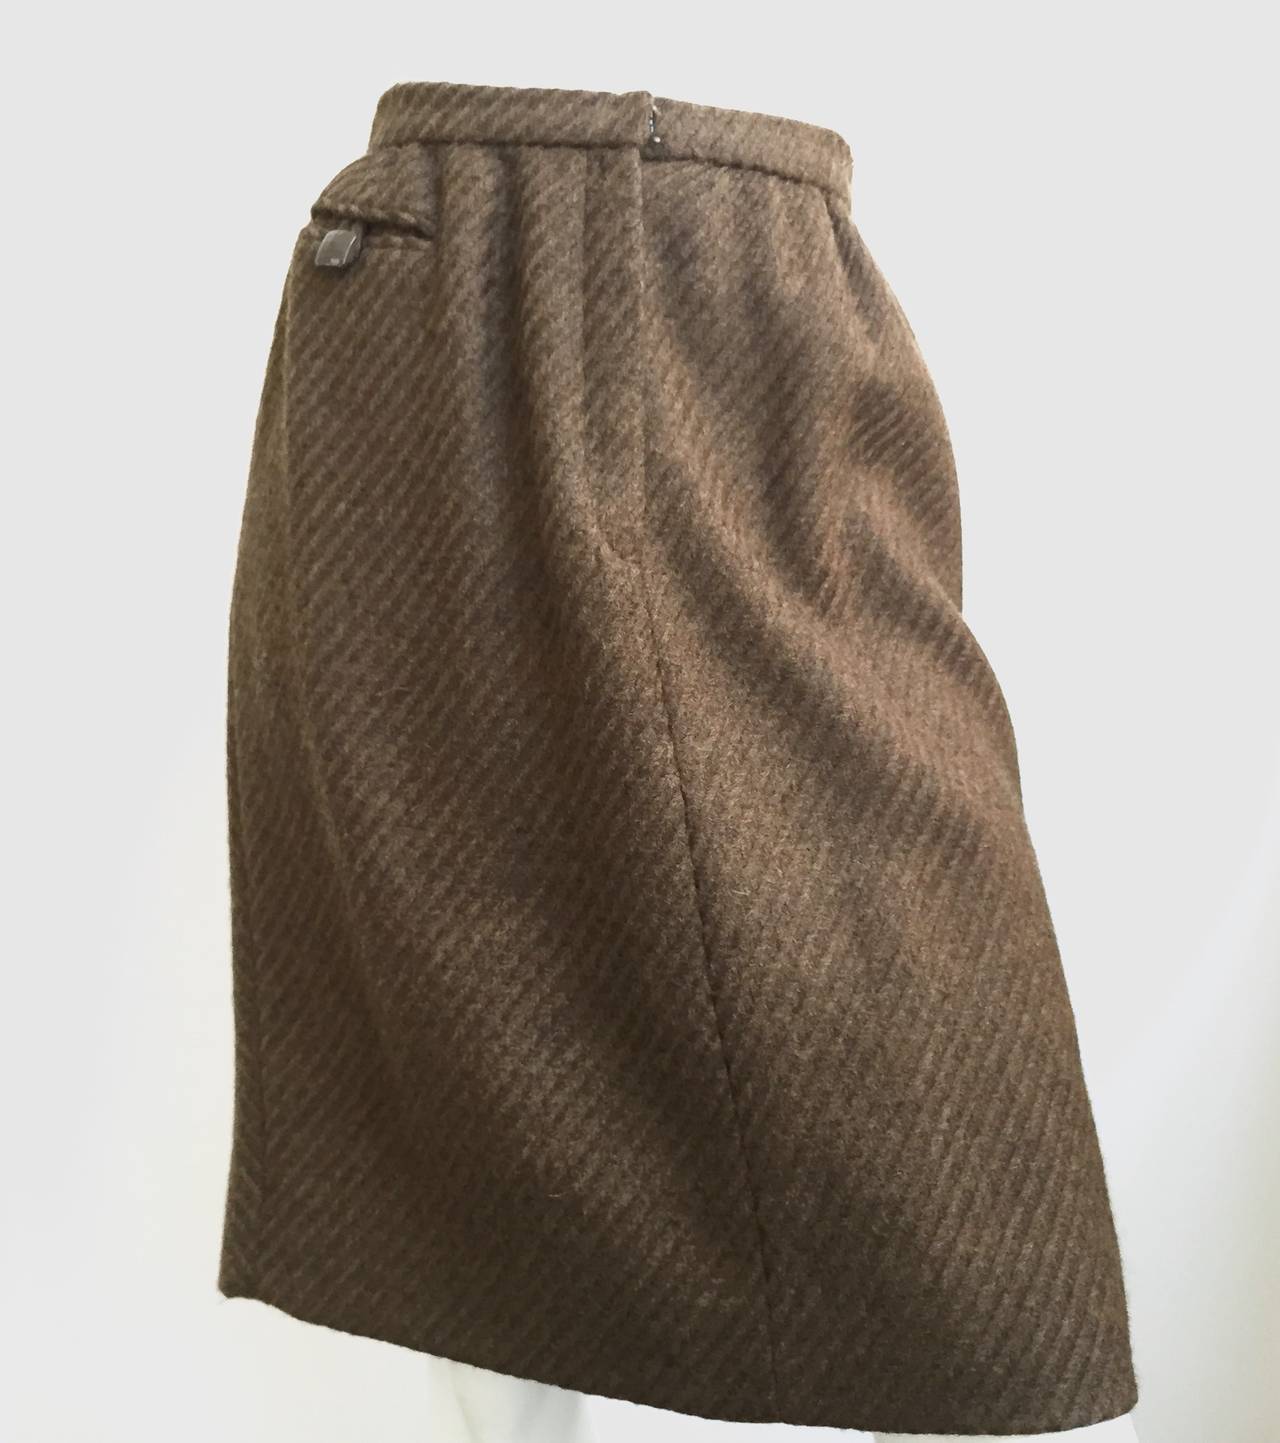 Carolina Herrera 1990s nubby brown wool skirt is a vintage size 8 but fits like a modern USA size 6.  Please see & use measurements below so you can properly measure your lovely body to make sure this will fit you to perfection. Silk lined